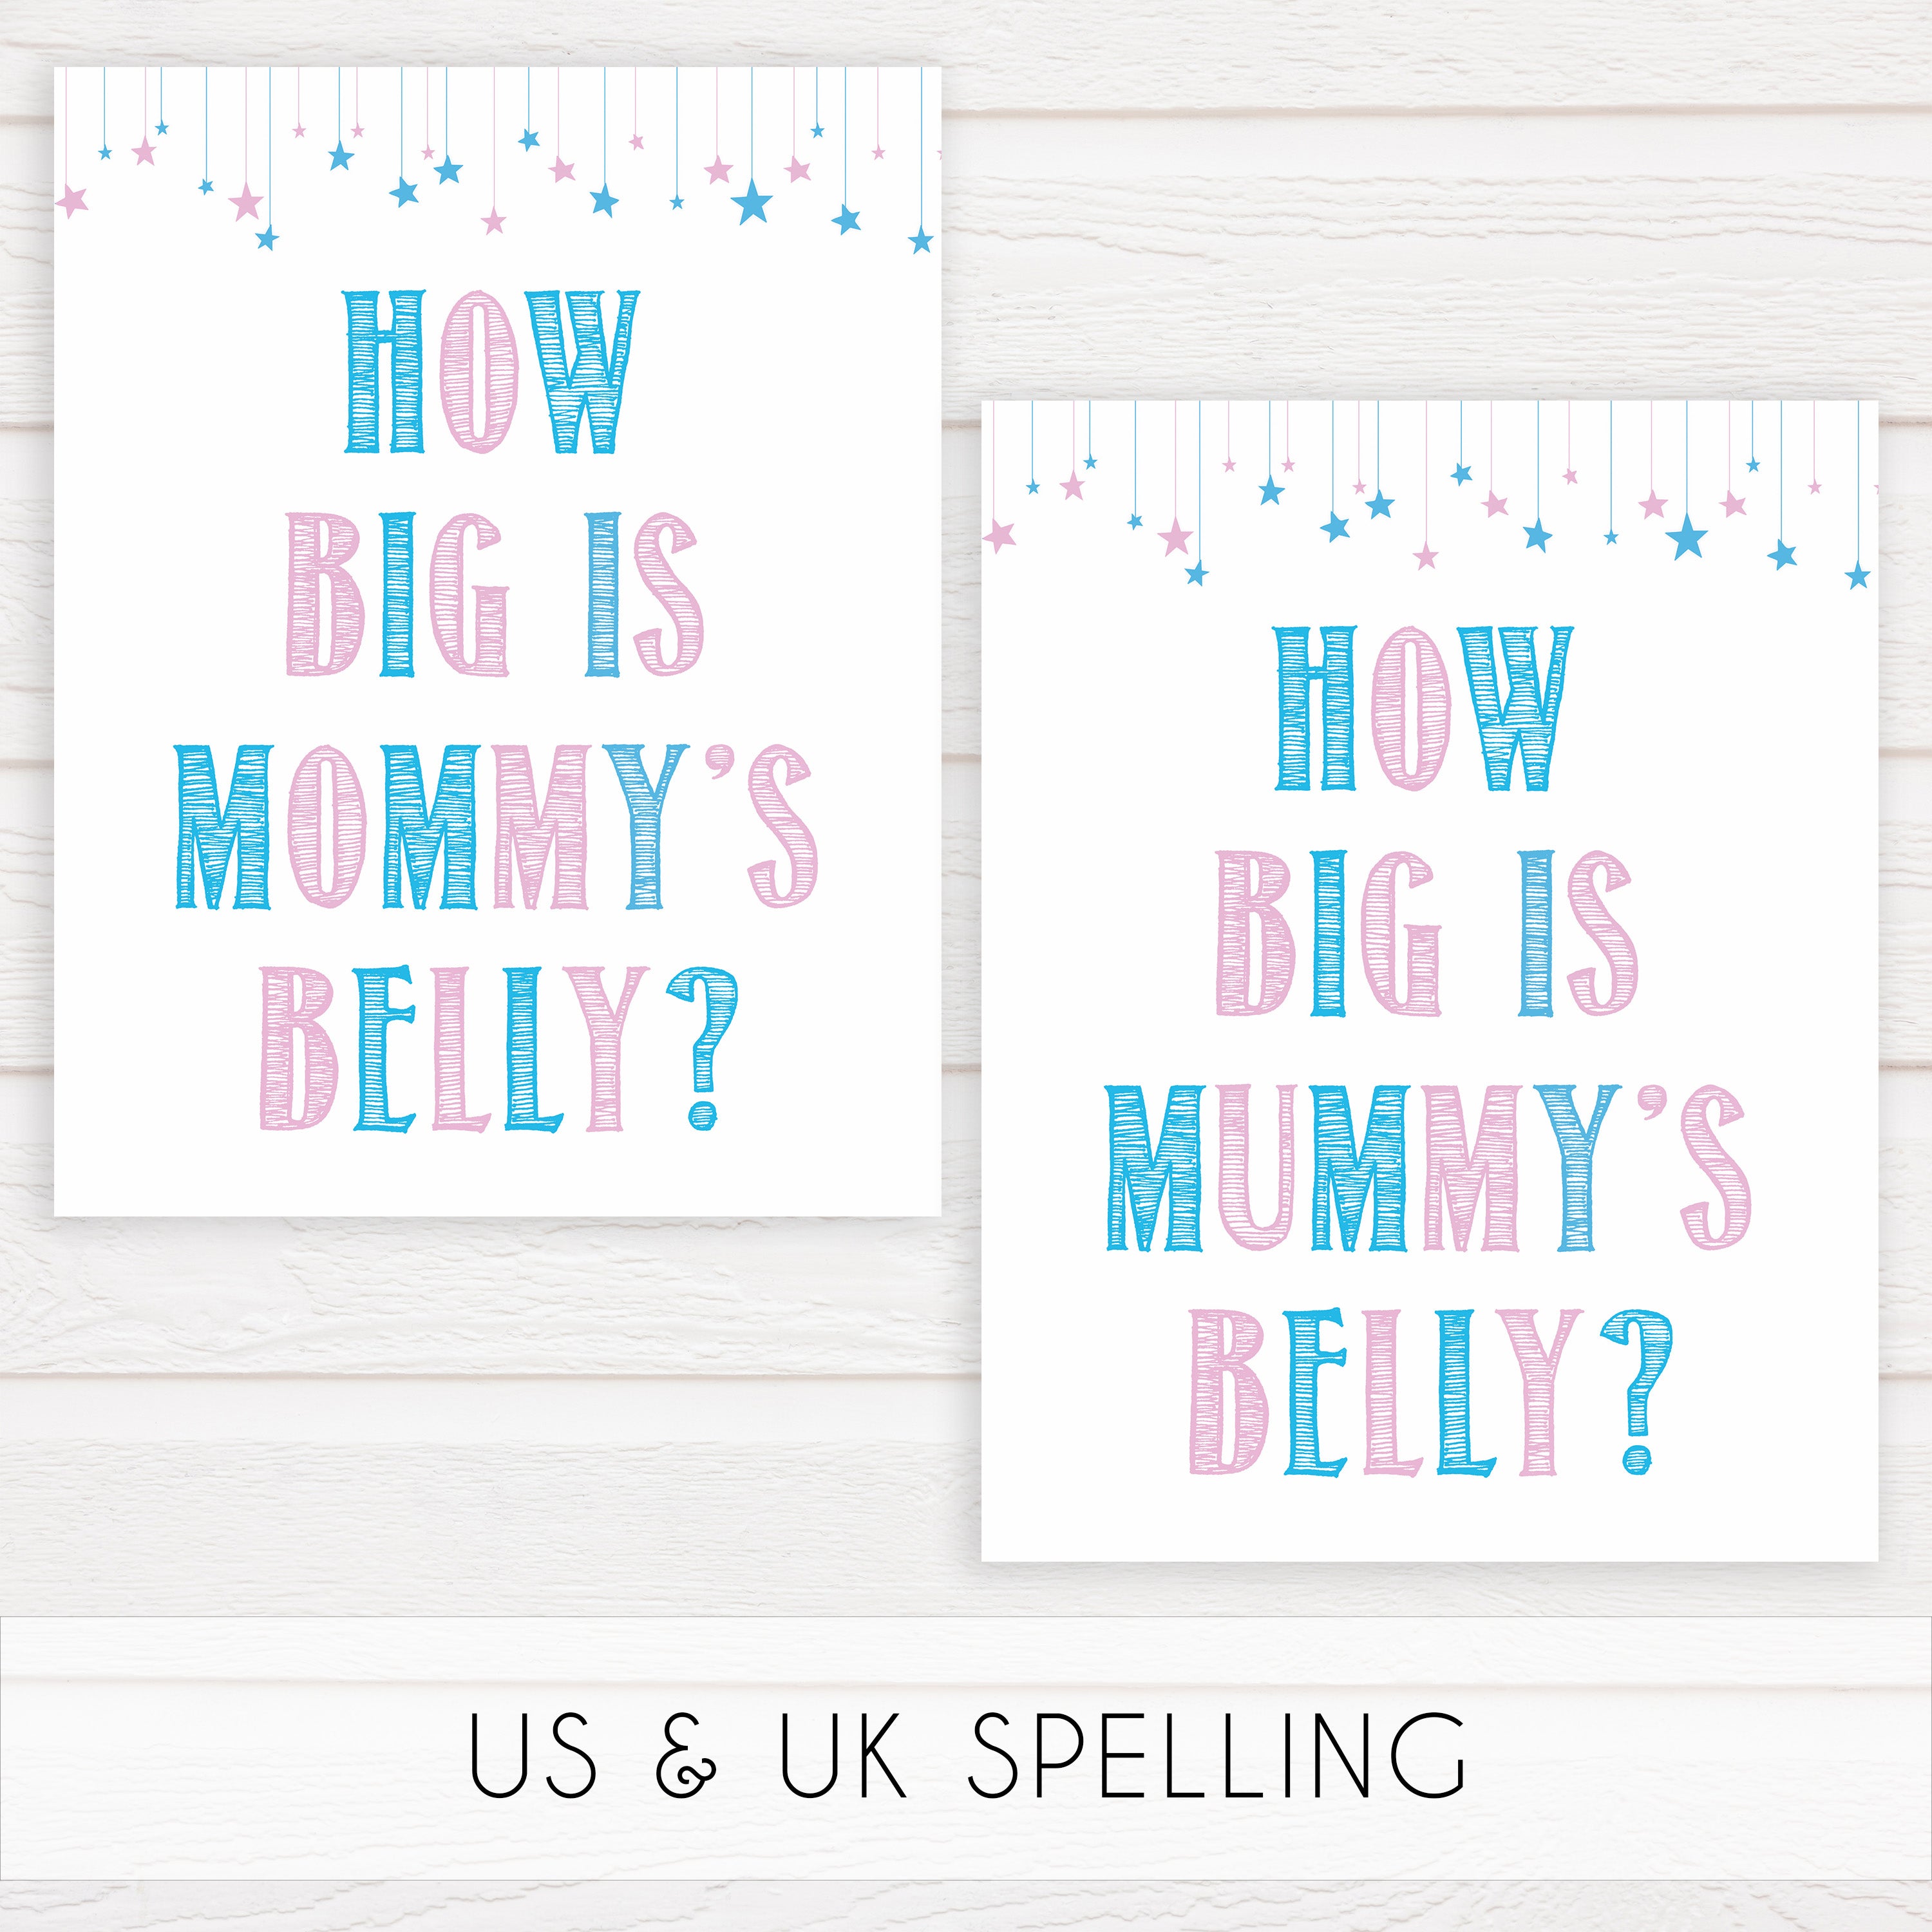 Gender reveal baby games, how big is mommys belly baby game, gender reveal shower, fun baby games, gender reveal ideas, popular baby games, best baby games, printable baby games, gender reveal baby games